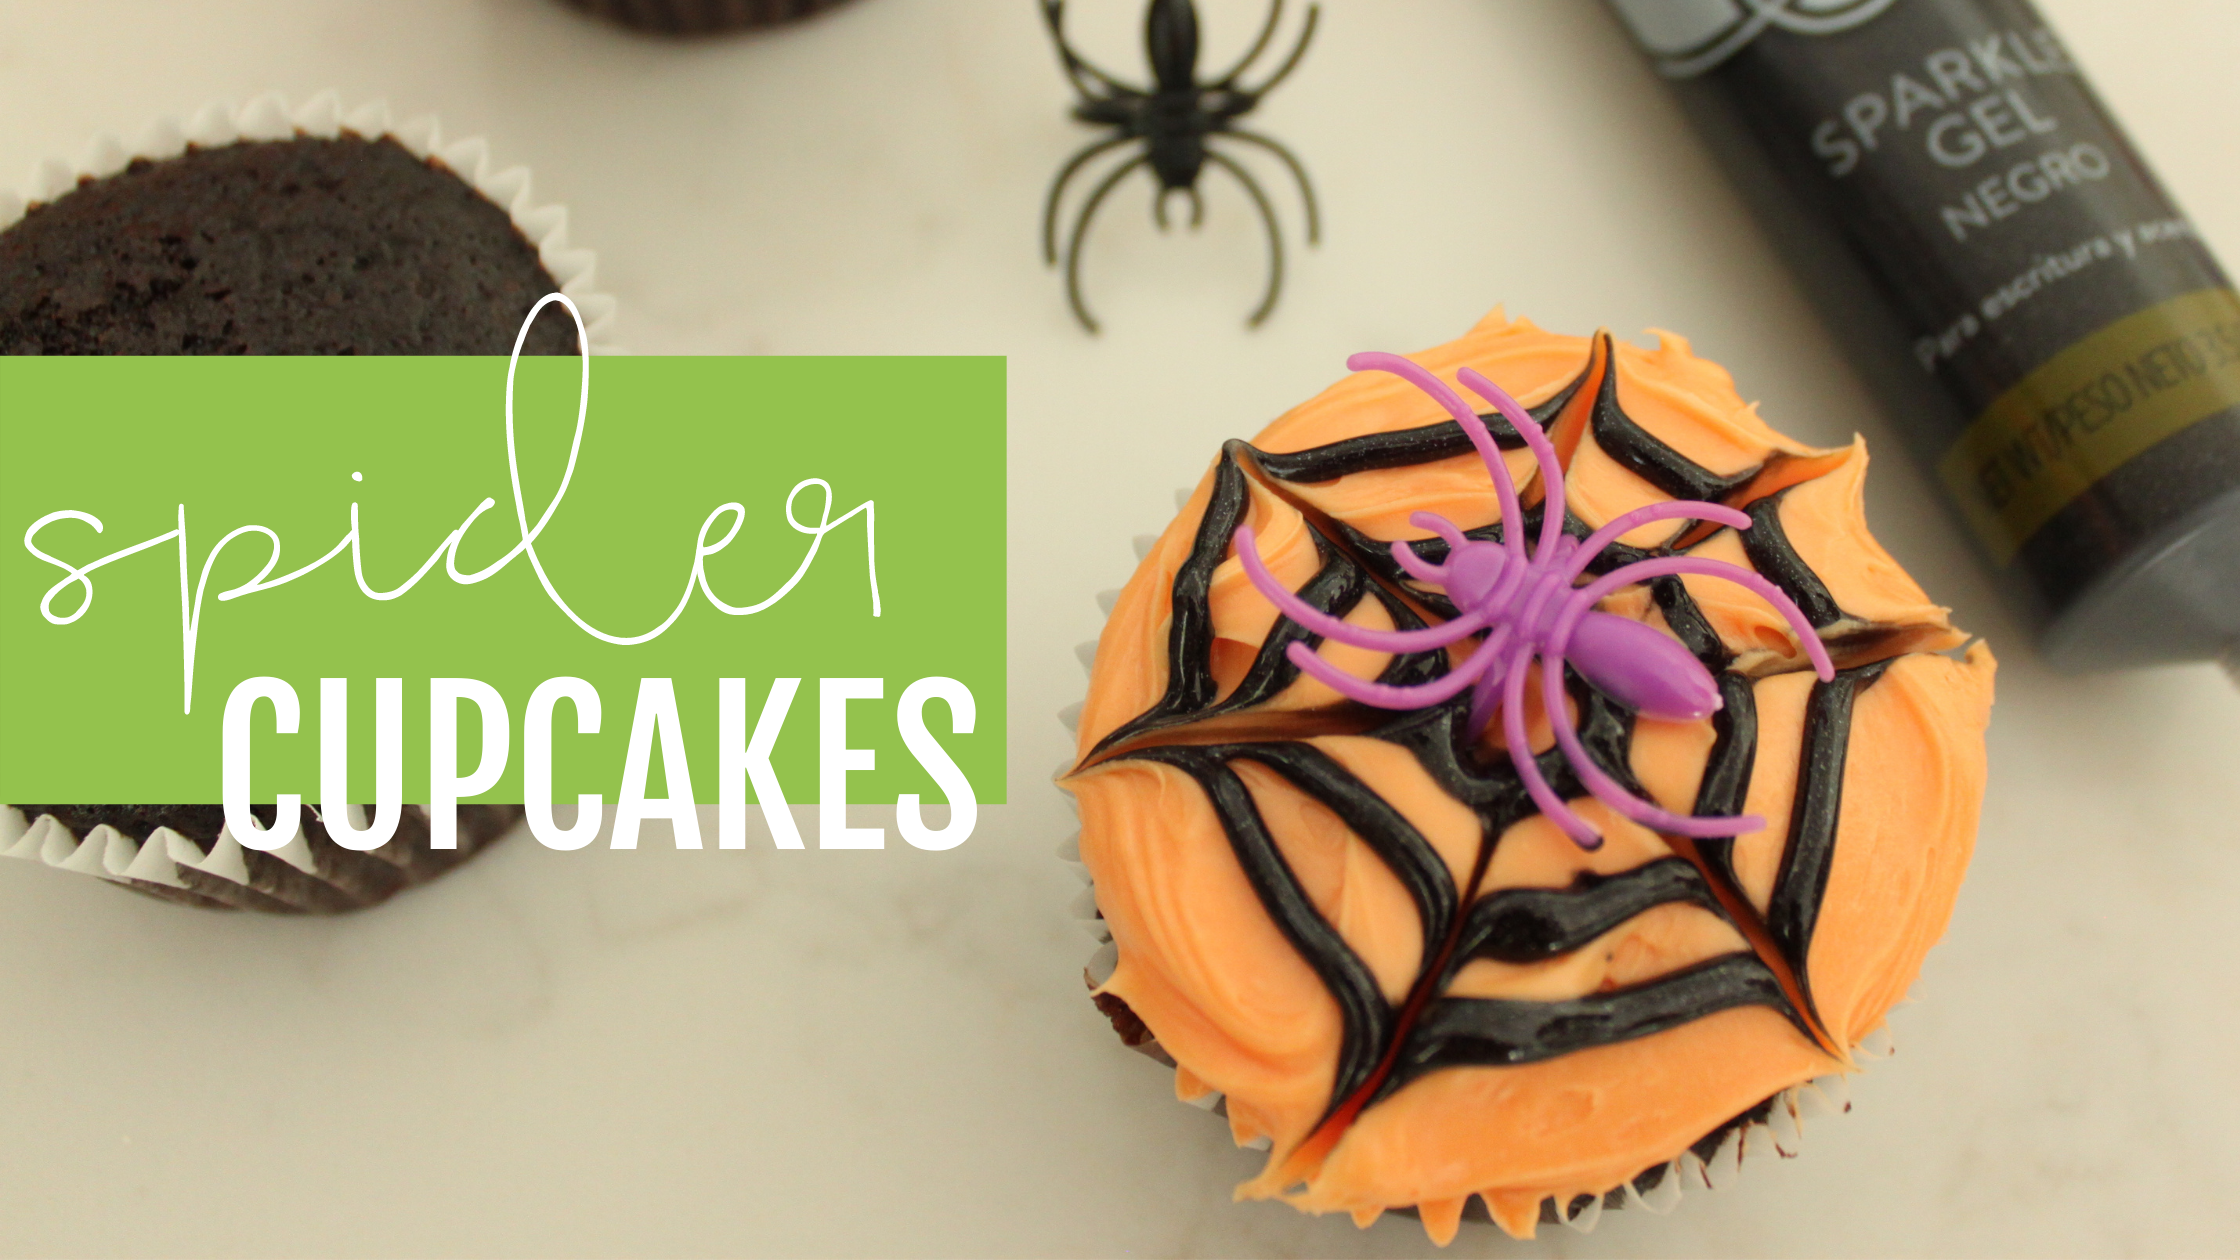 HOW TO MAKE SPIDER CUPCAKES